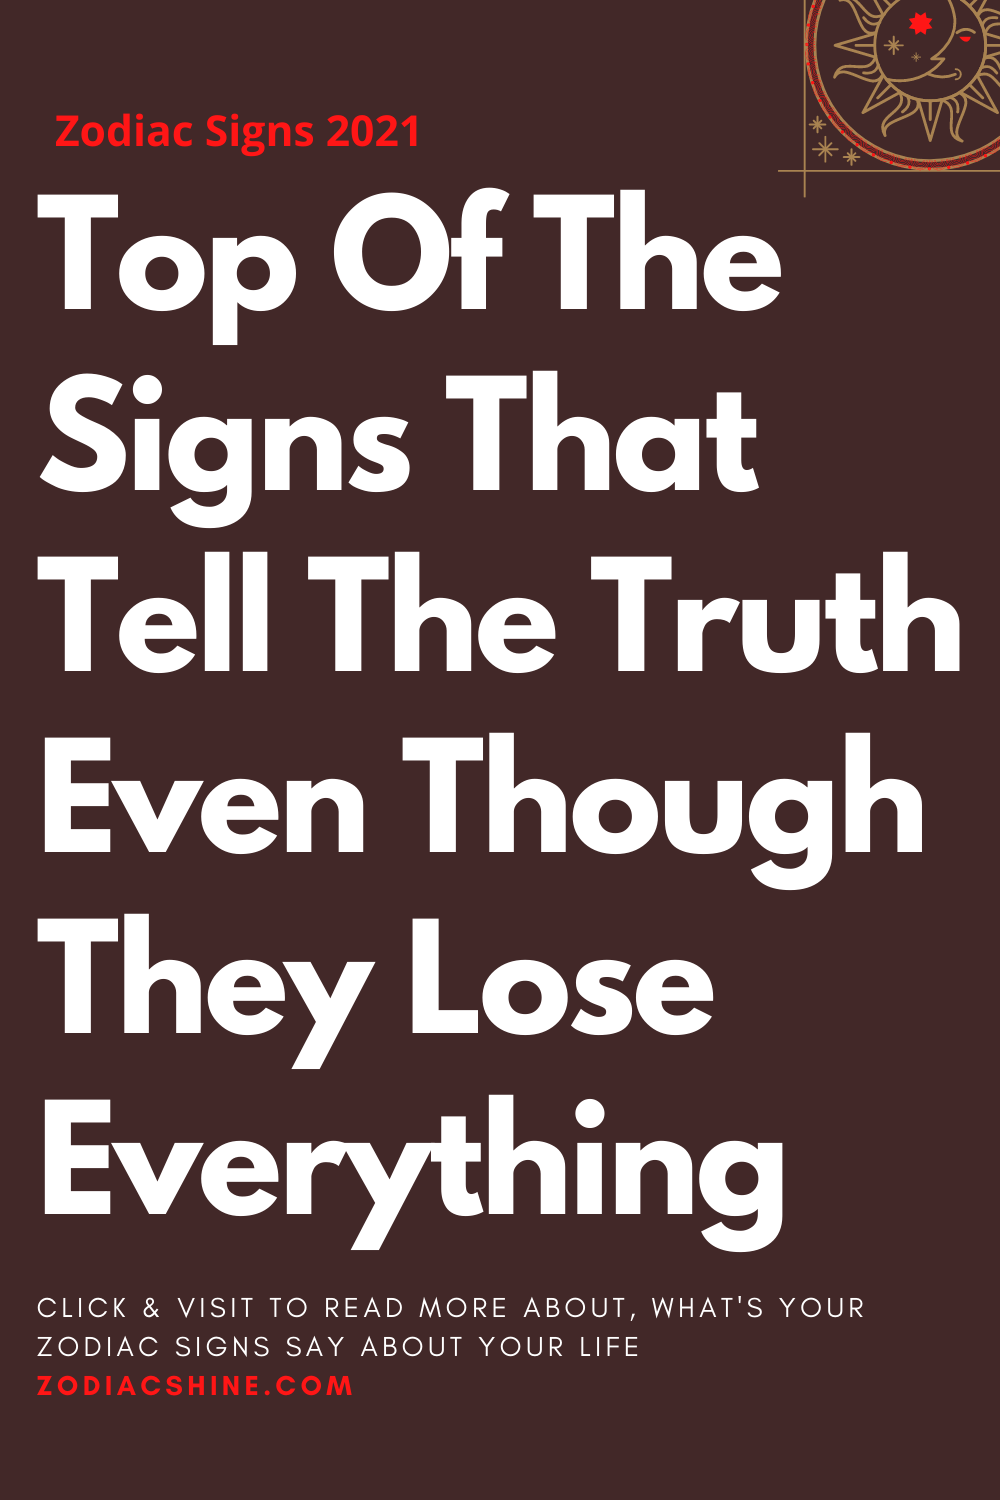 Top Of The Signs That Tell The Truth Even Though They Lose Everything